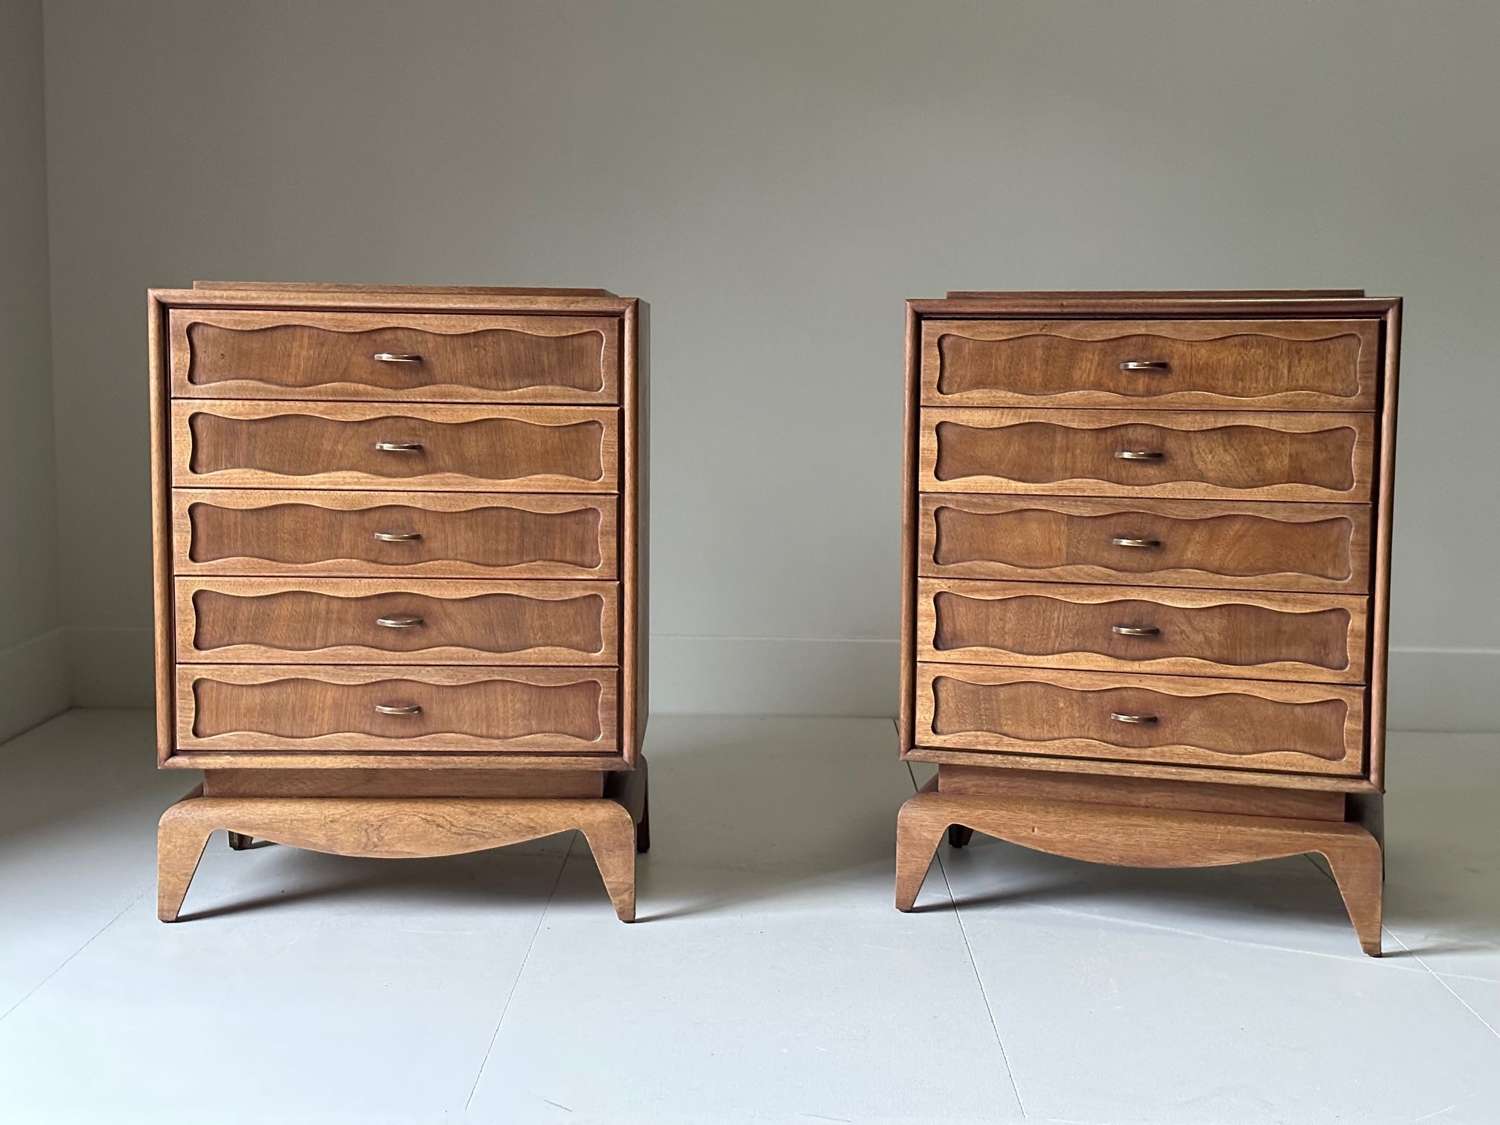 C1940 A Rare Pair of Italian Walnut Commodes / Bedsides